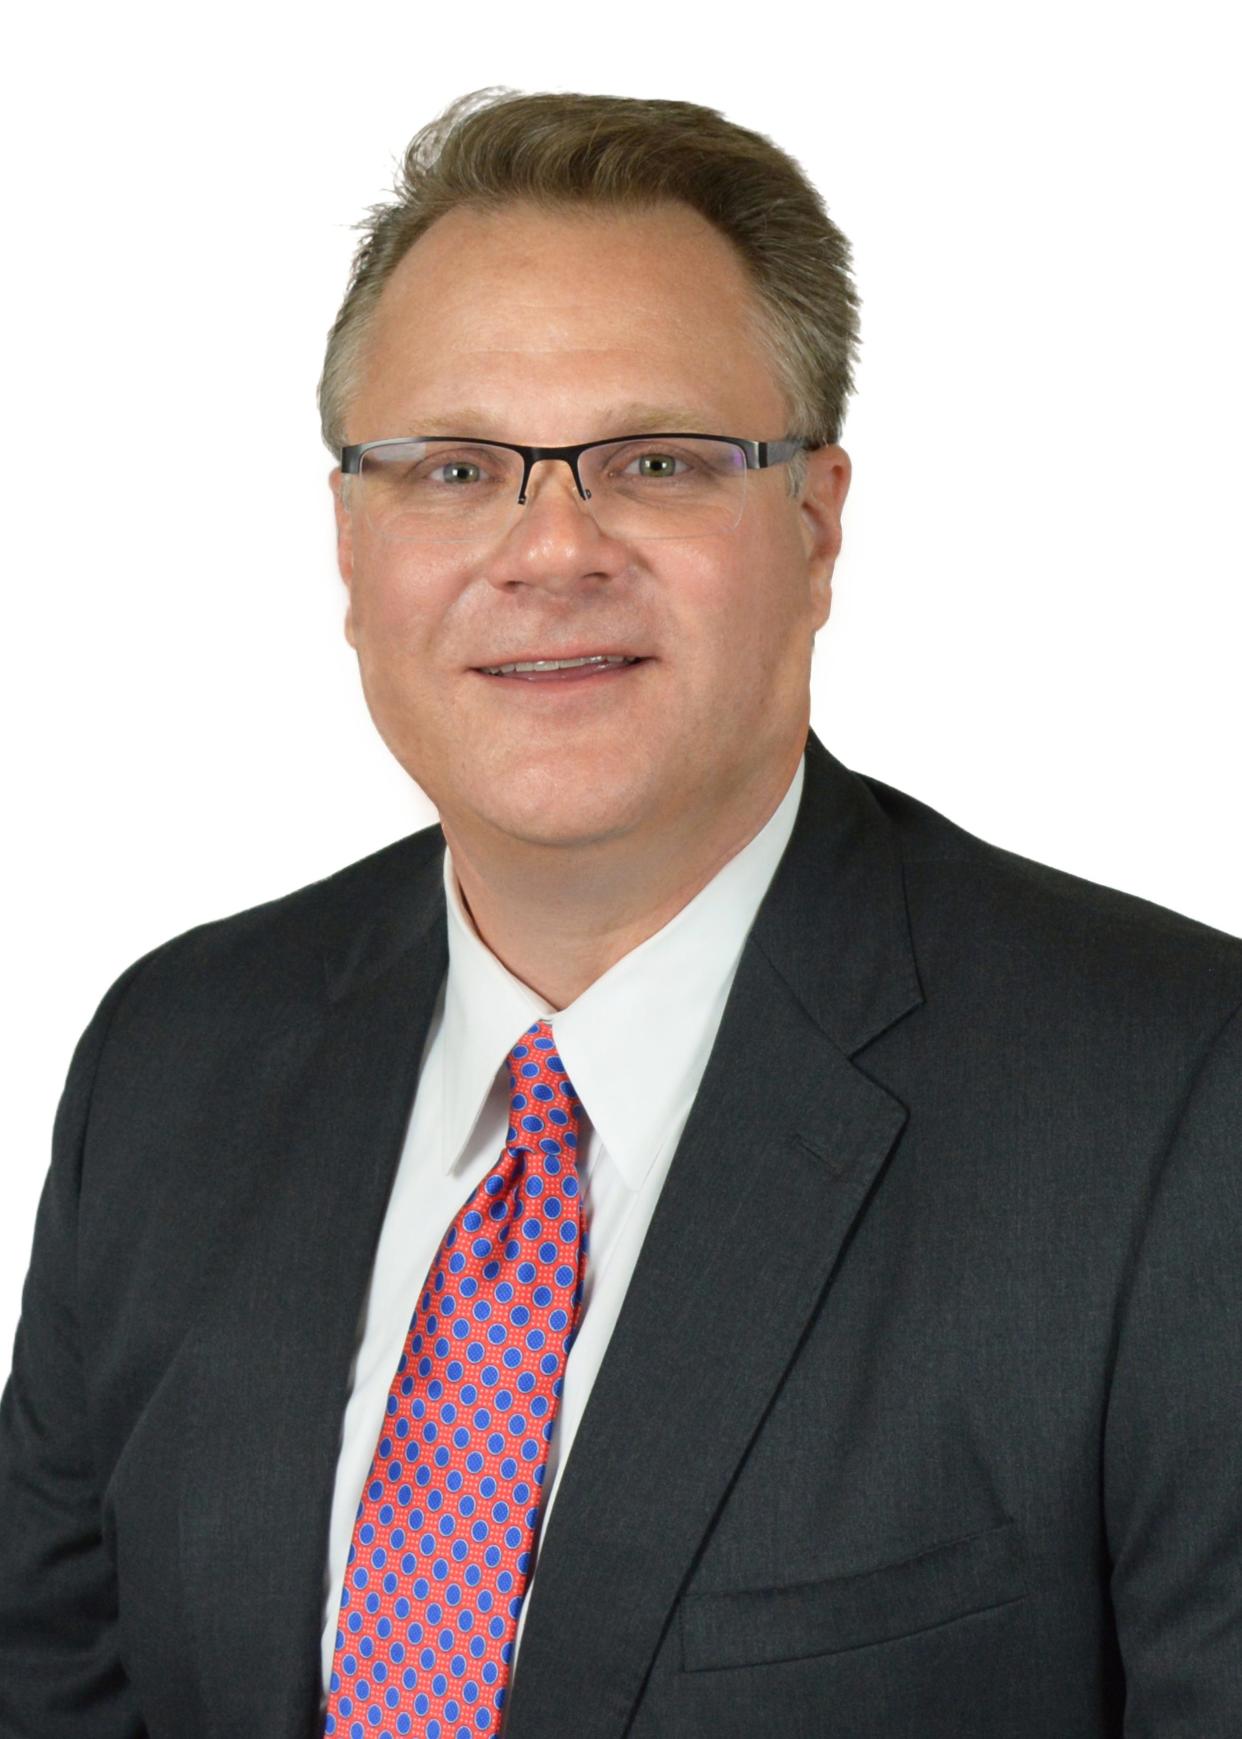 Brian Lane is president  and chief executive officer of the Center for Health Affairs.